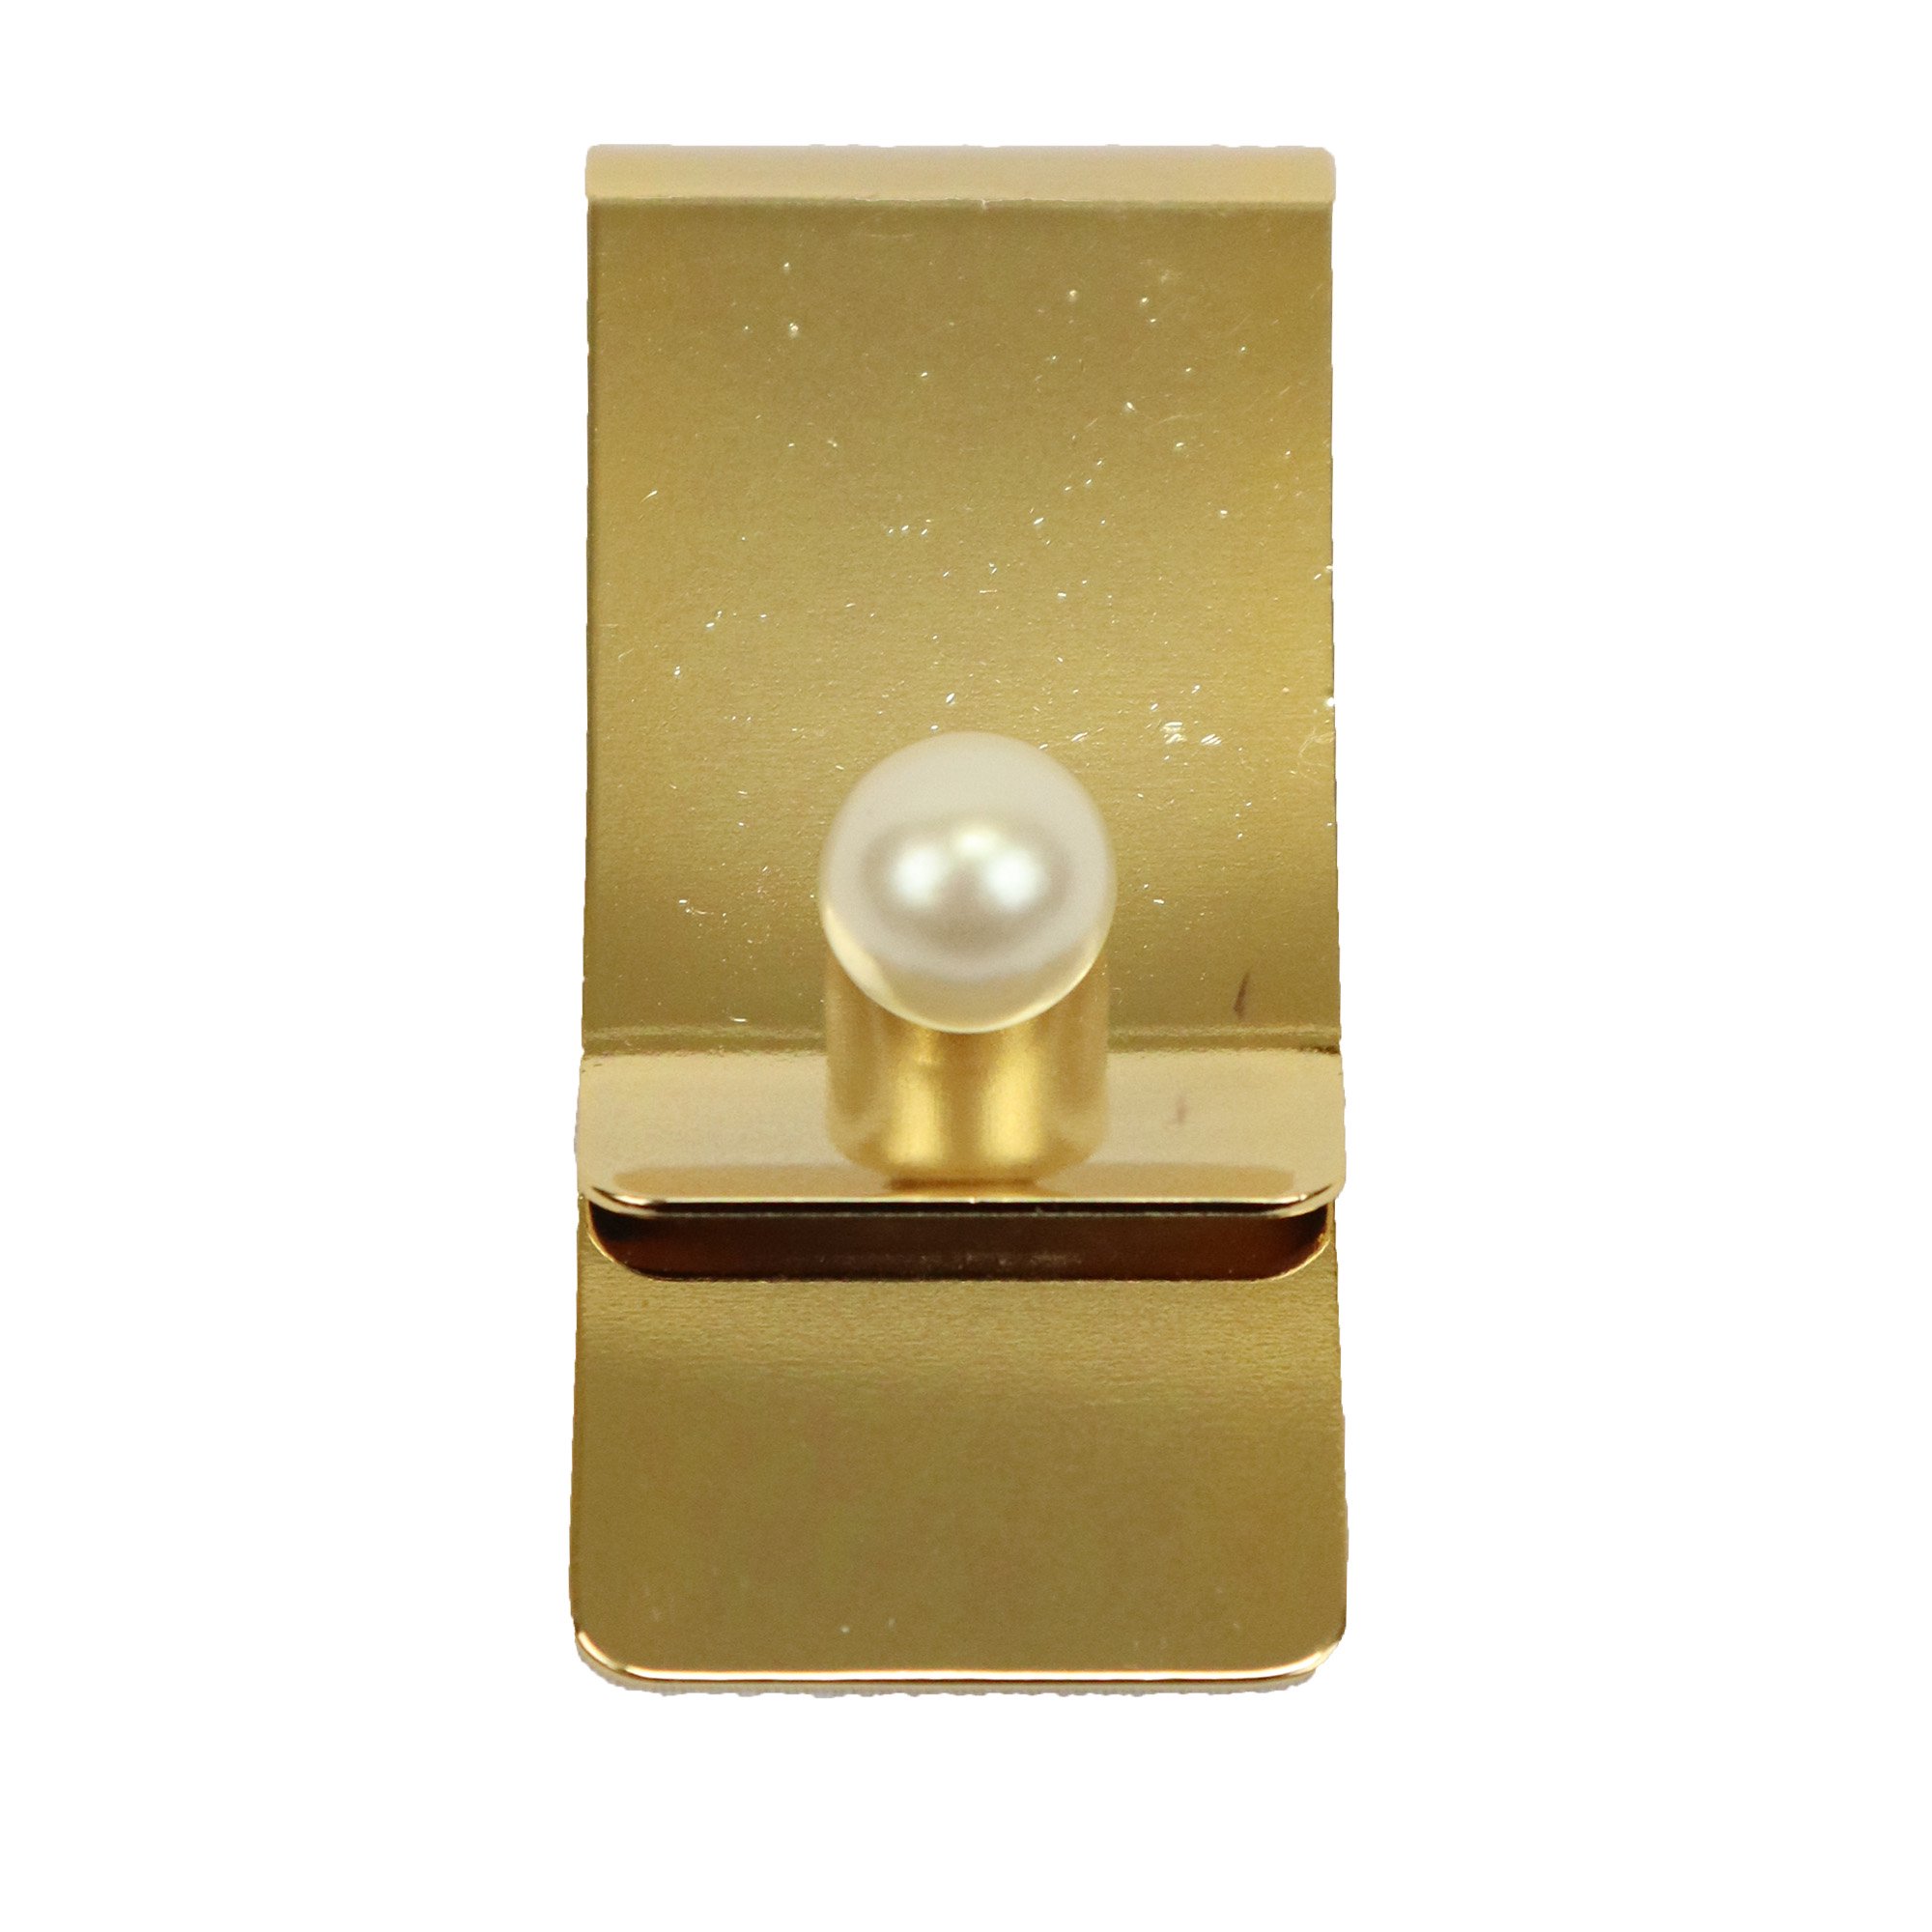 <img class='new_mark_img1' src='https://img.shop-pro.jp/img/new/icons6.gif' style='border:none;display:inline;margin:0px;padding:0px;width:auto;' />SEA'DS MARA Pearl money clip【GOLD】